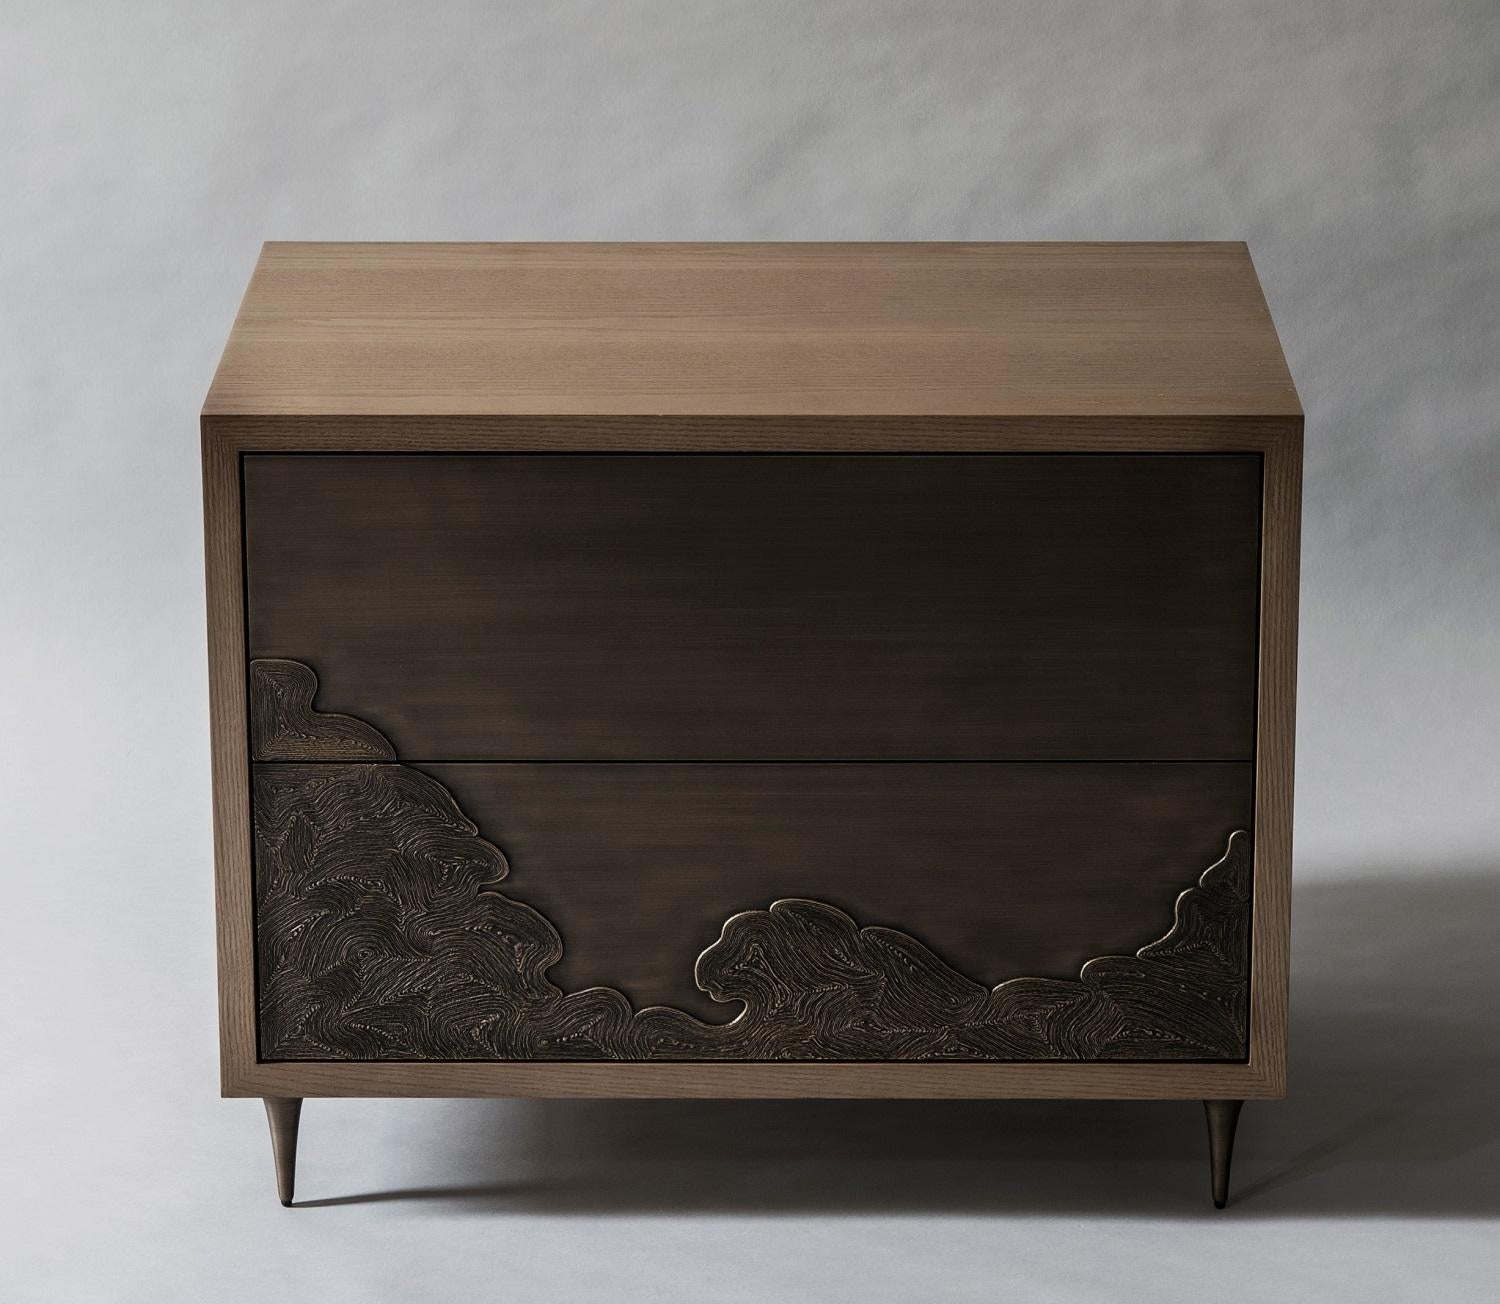 Contemporary Nami Bedside Table by DeMuro Das with Hand-Cast Solid Antique Bronze Drawers